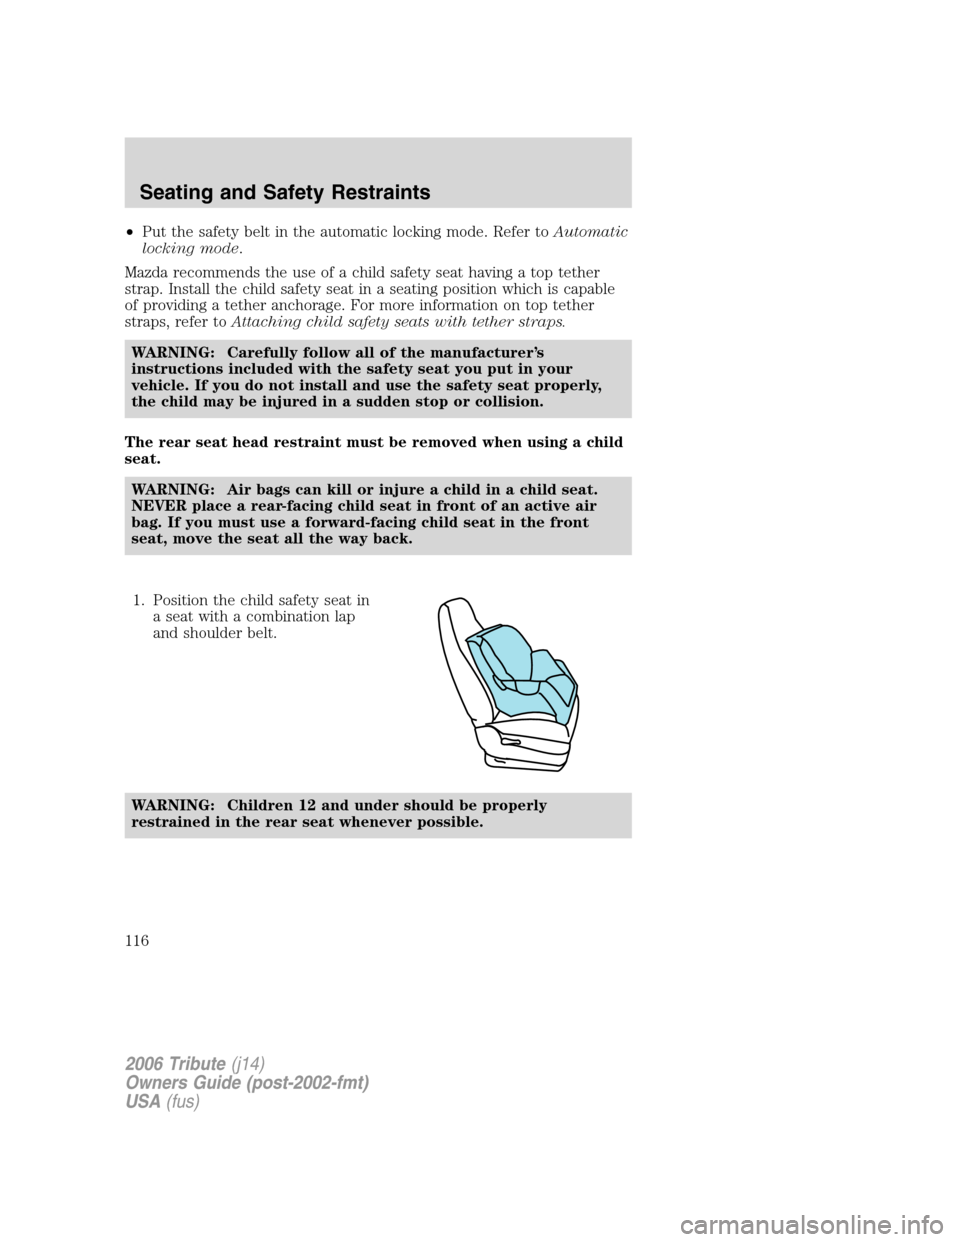 MAZDA MODEL TRIBUTE 2006  Owners Manual (in English) •Put the safety belt in the automatic locking mode. Refer toAutomatic
locking mode.
Mazda recommends the use of a child safety seat having a top tether
strap. Install the child safety seat in a seat